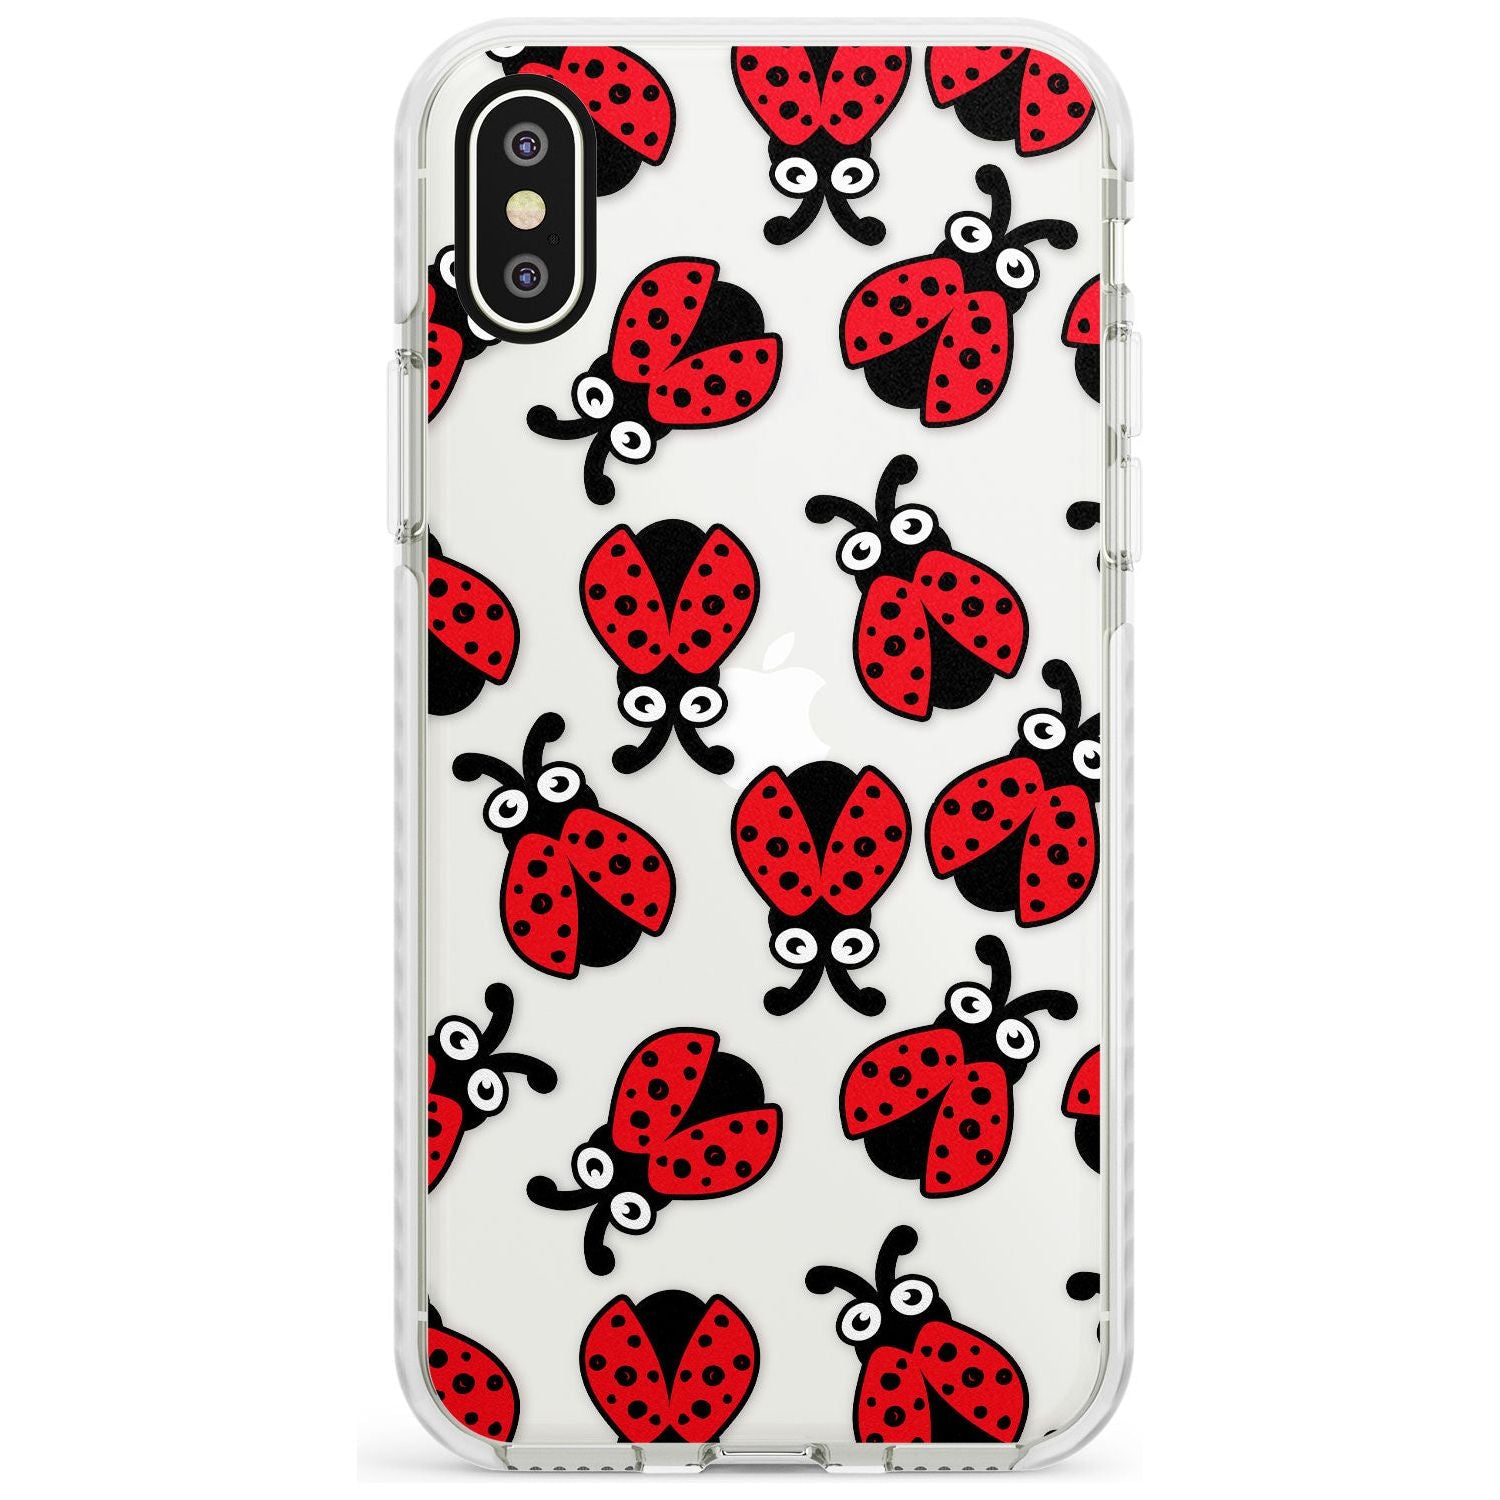 Ladybug Pattern Phone Case for iPhone X XS Max XR